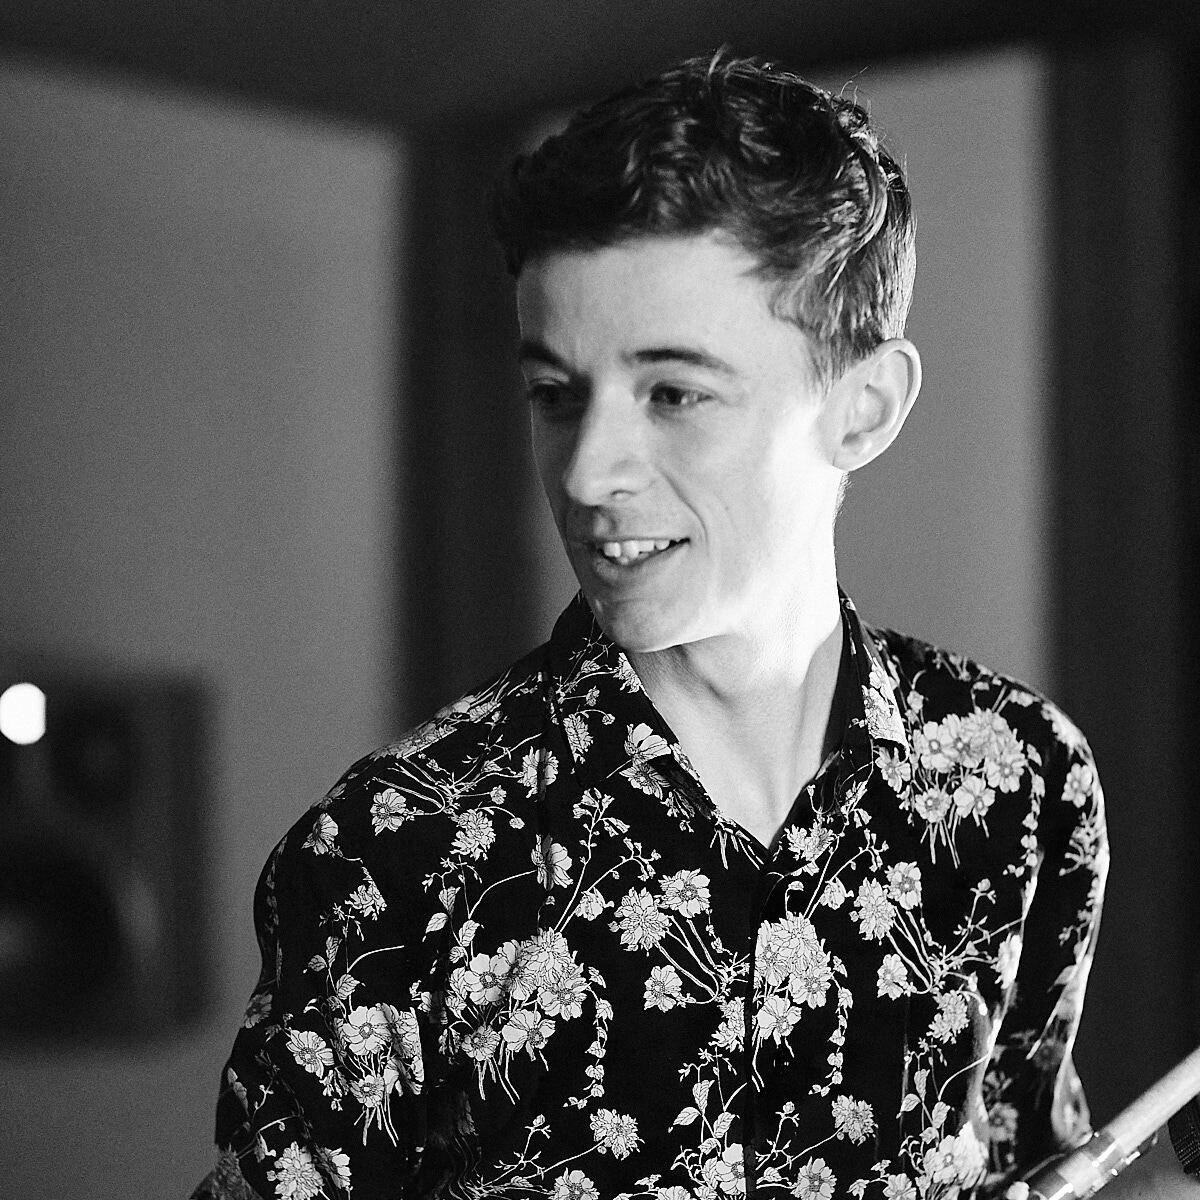 Composer Ciaran Frame wears a floral shirt, looking to the left of the camera. The image is black and white, and you can see part of his flute that he is holding